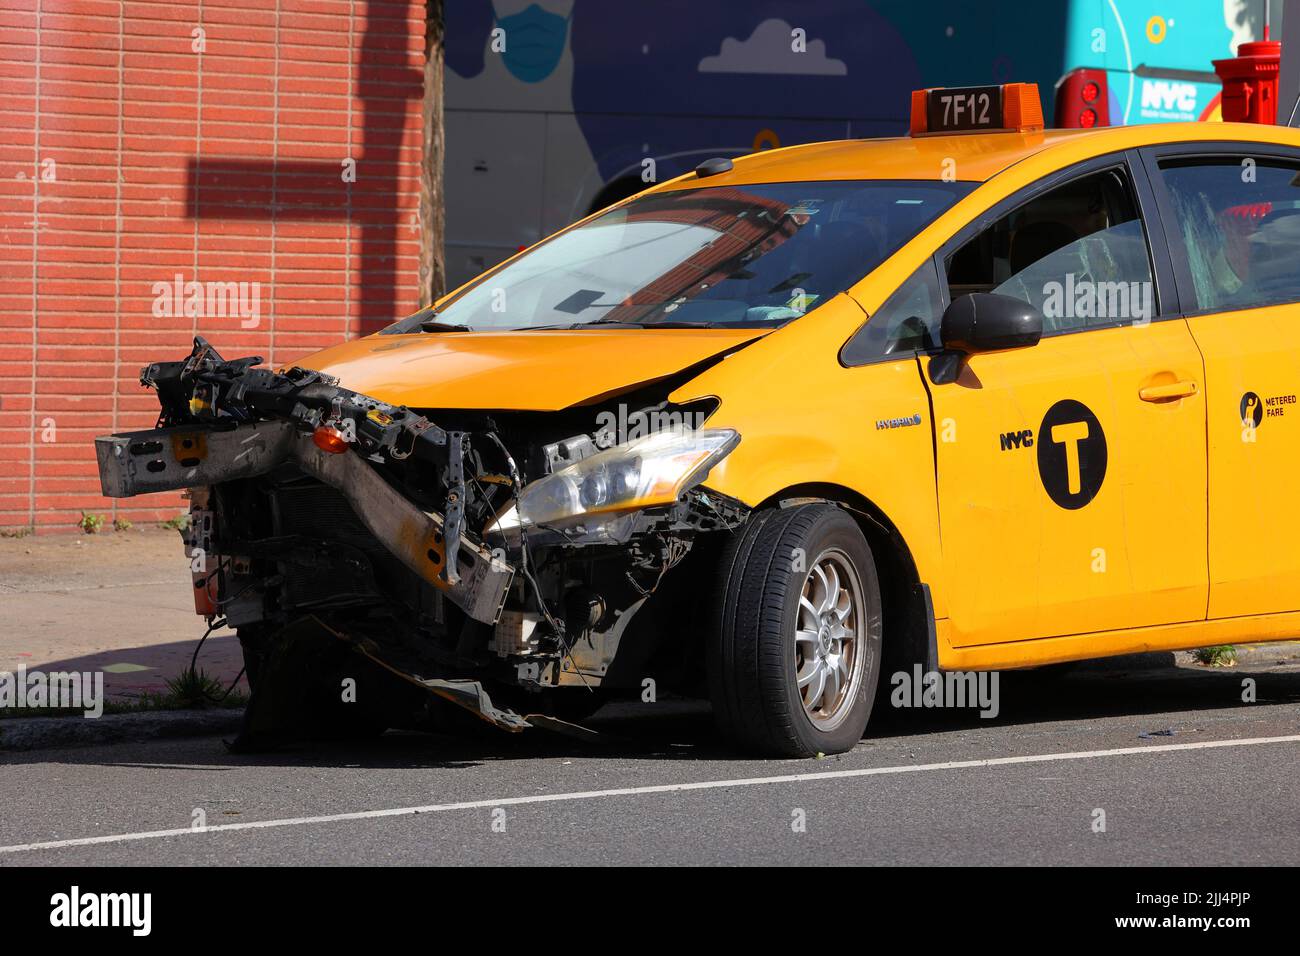 A totalled NYC Taxi with front end damage. A New York City Yellow Taxi crash after a head on collision. Stock Photo